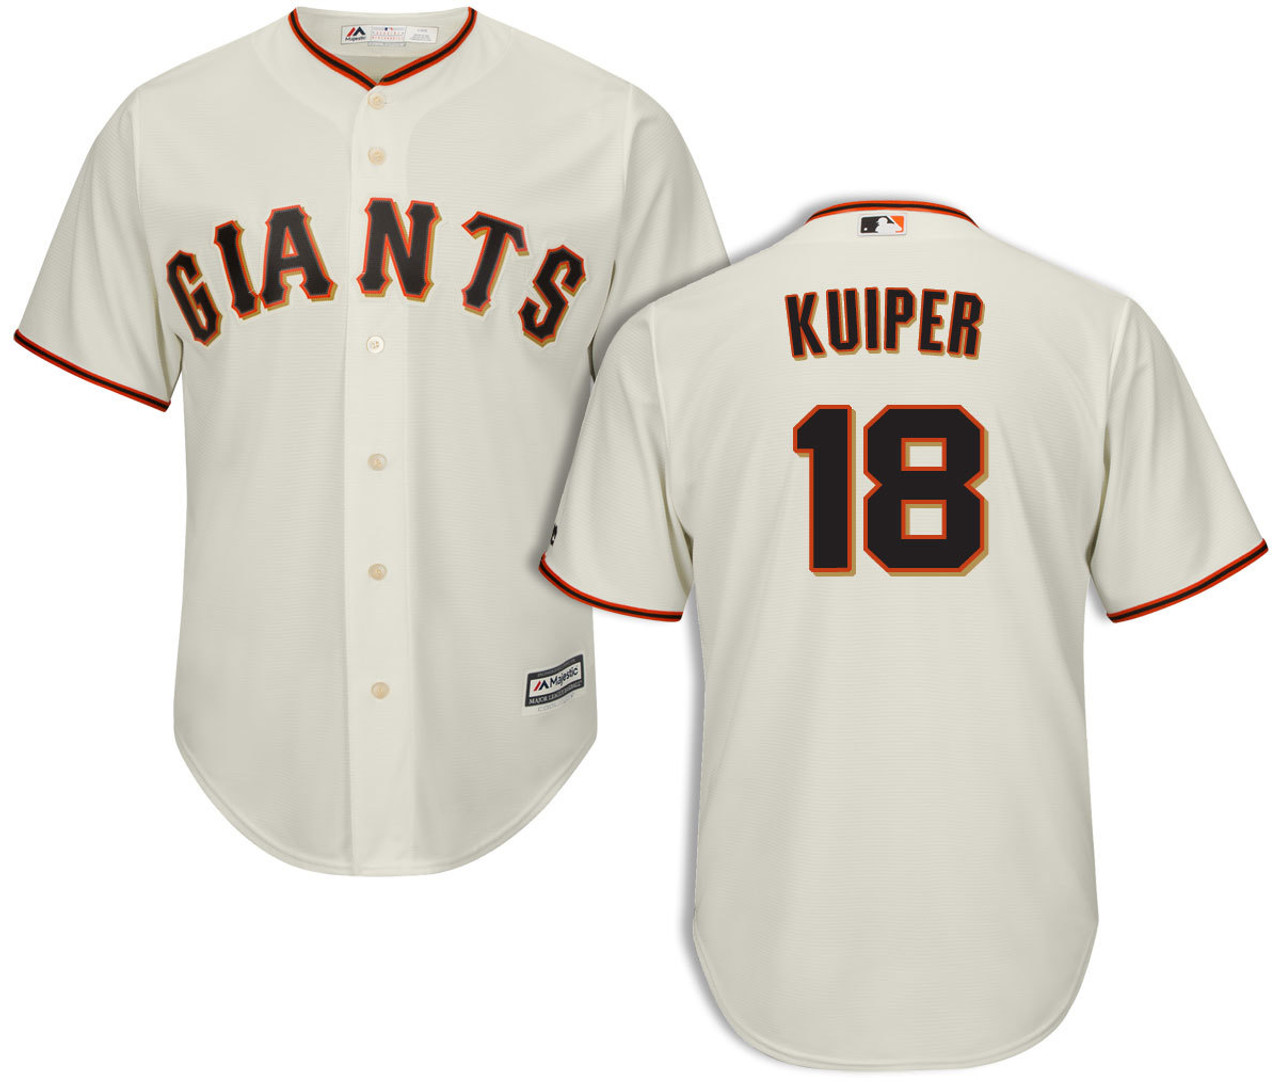 stores that sell giants jerseys